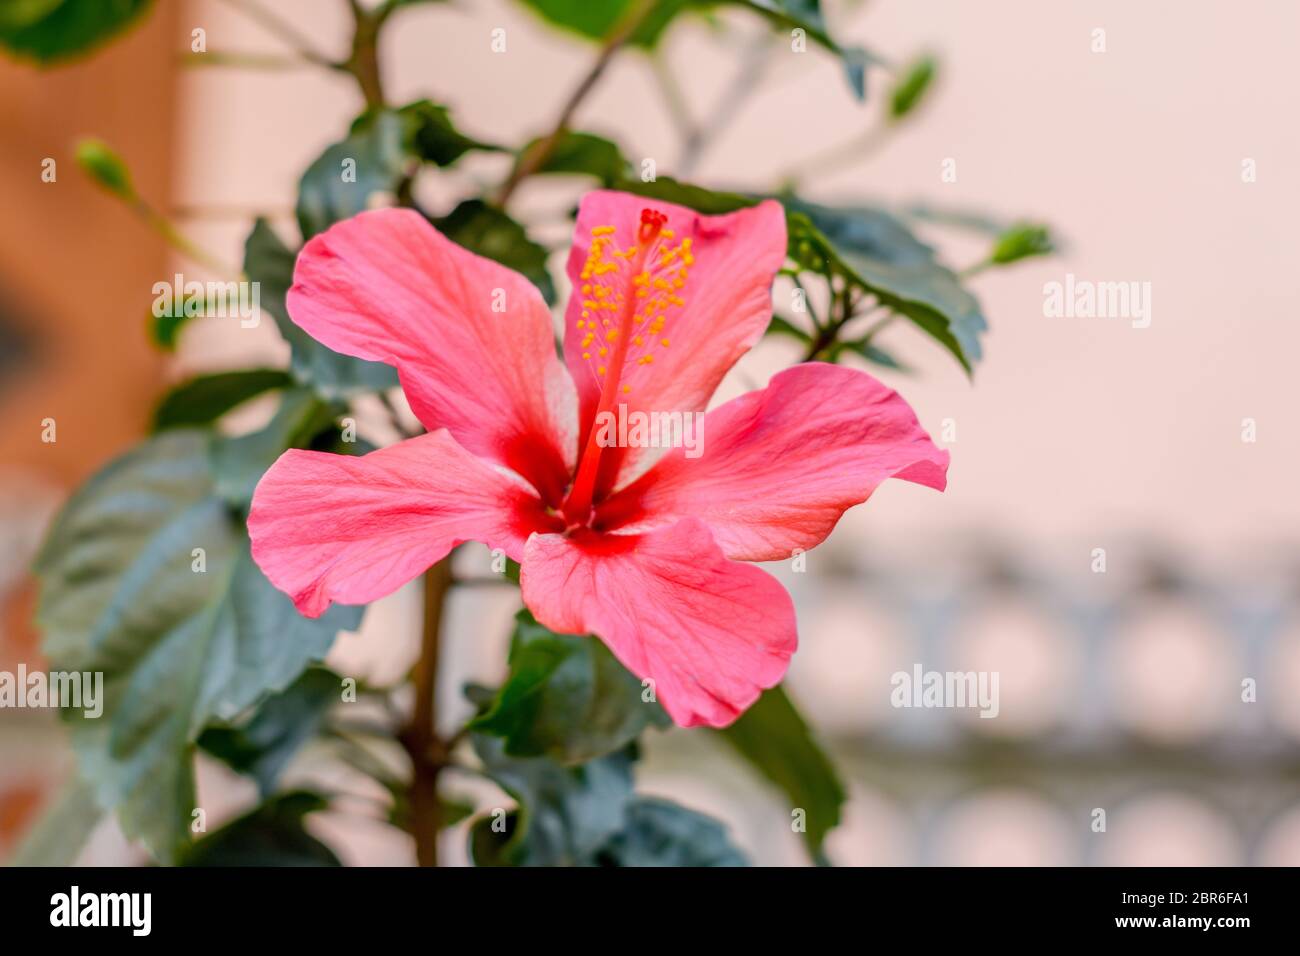 One Chaba flower (Hibiscus rosa-sinensis) chinese rose, red color, on upward direction, blooming in morning sunlight in isolated background. Winter fi Stock Photo